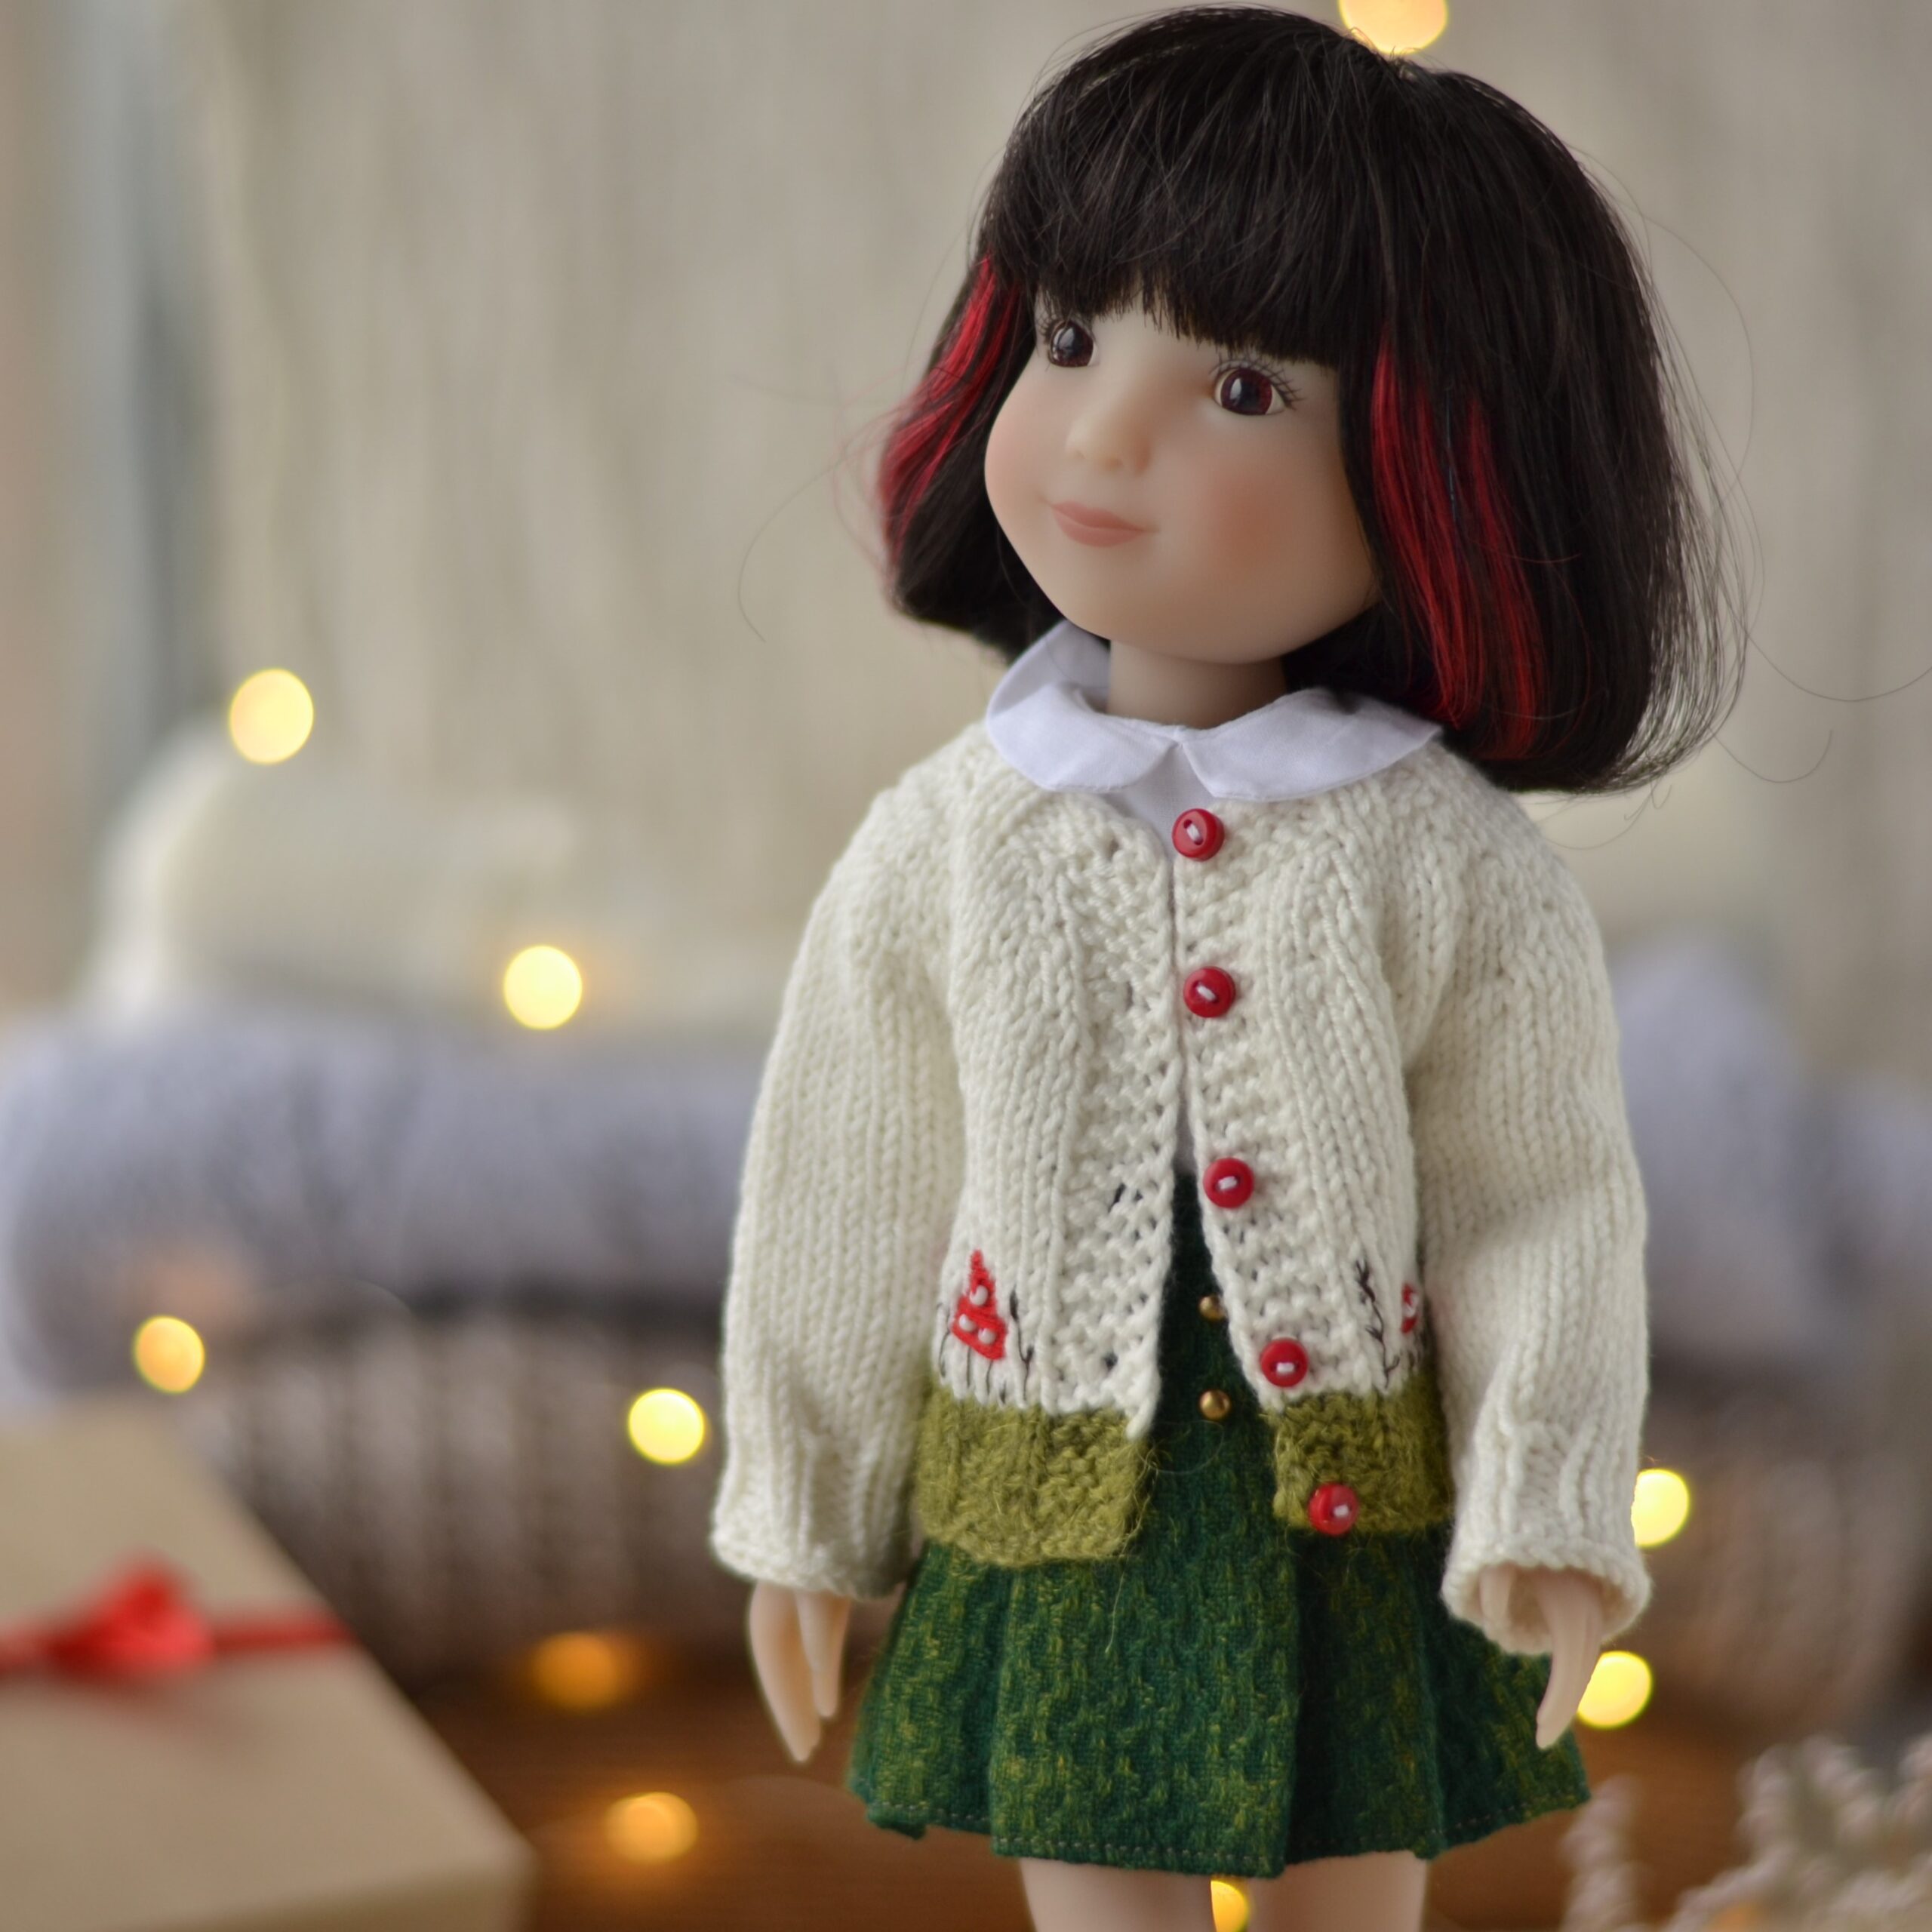 Amanita mushroom cardigan for Paola Reina KNIT PATTERN 32 cm doll clothes on Easter Agaric sweater for Ruby Red Siblies 12-13 inch doll